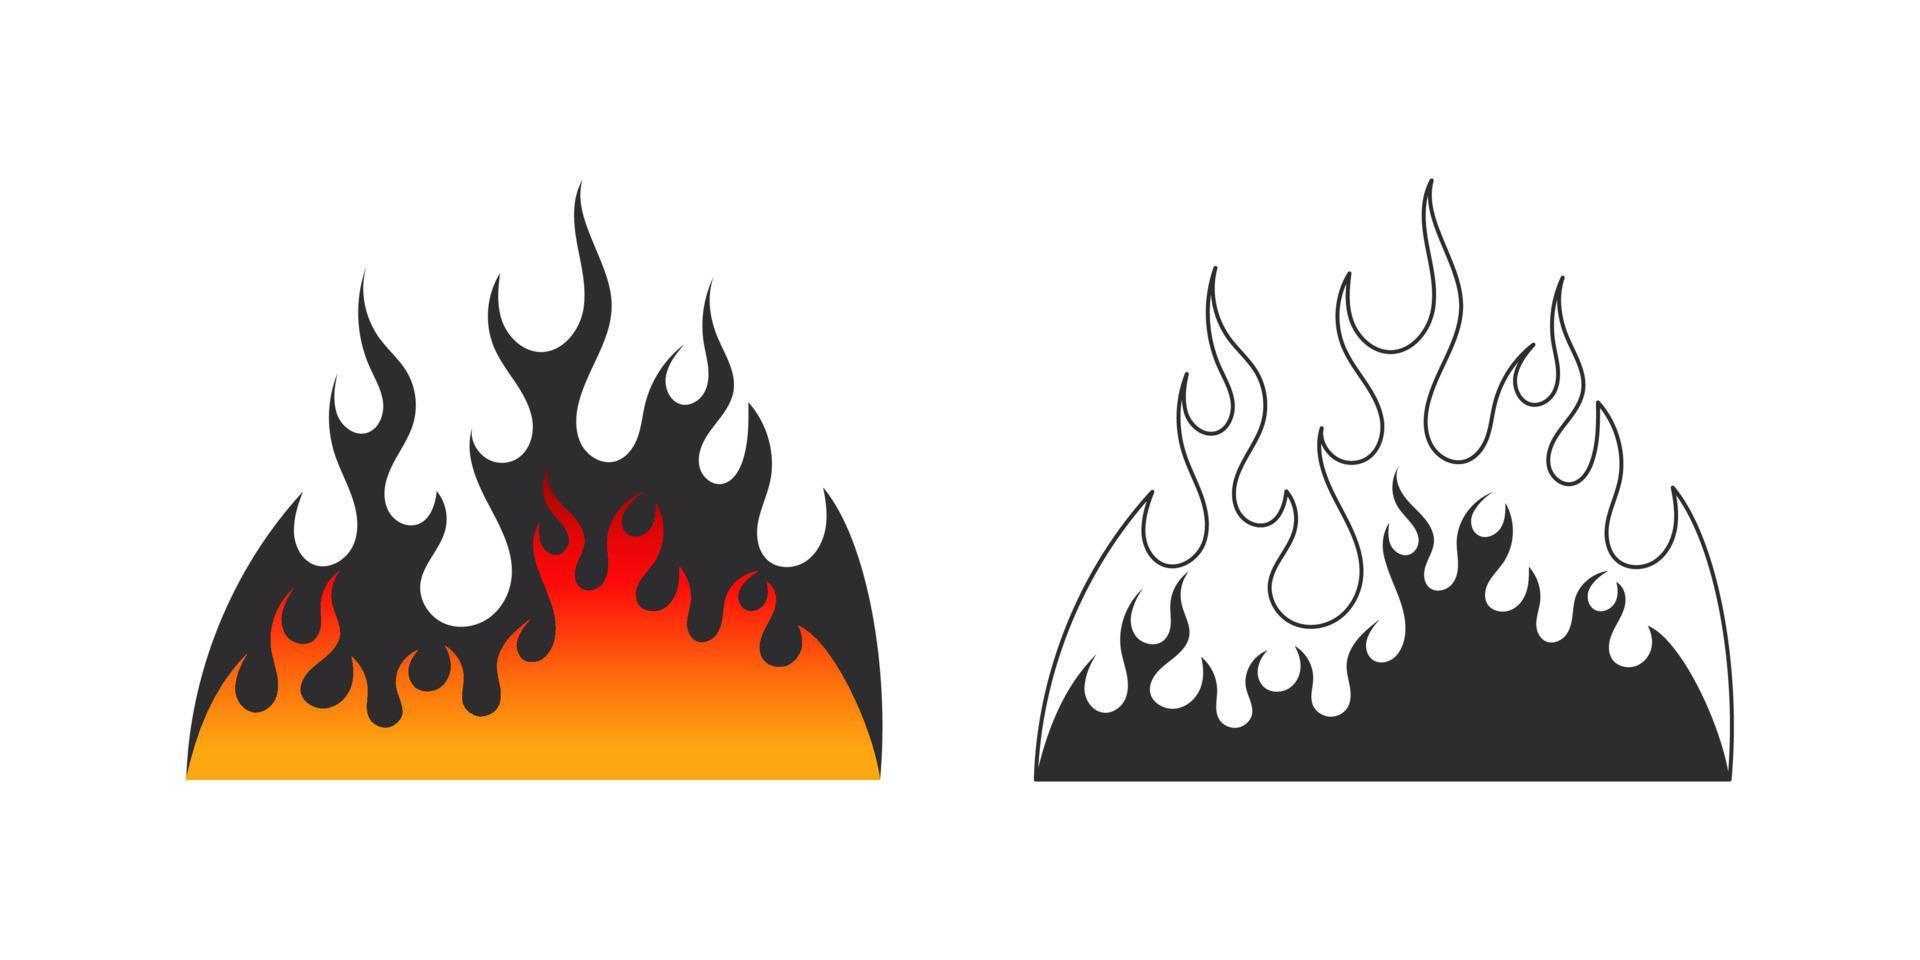 Fire flame. Fire and flames. Black and red fiery flames. Vector scalable graphics